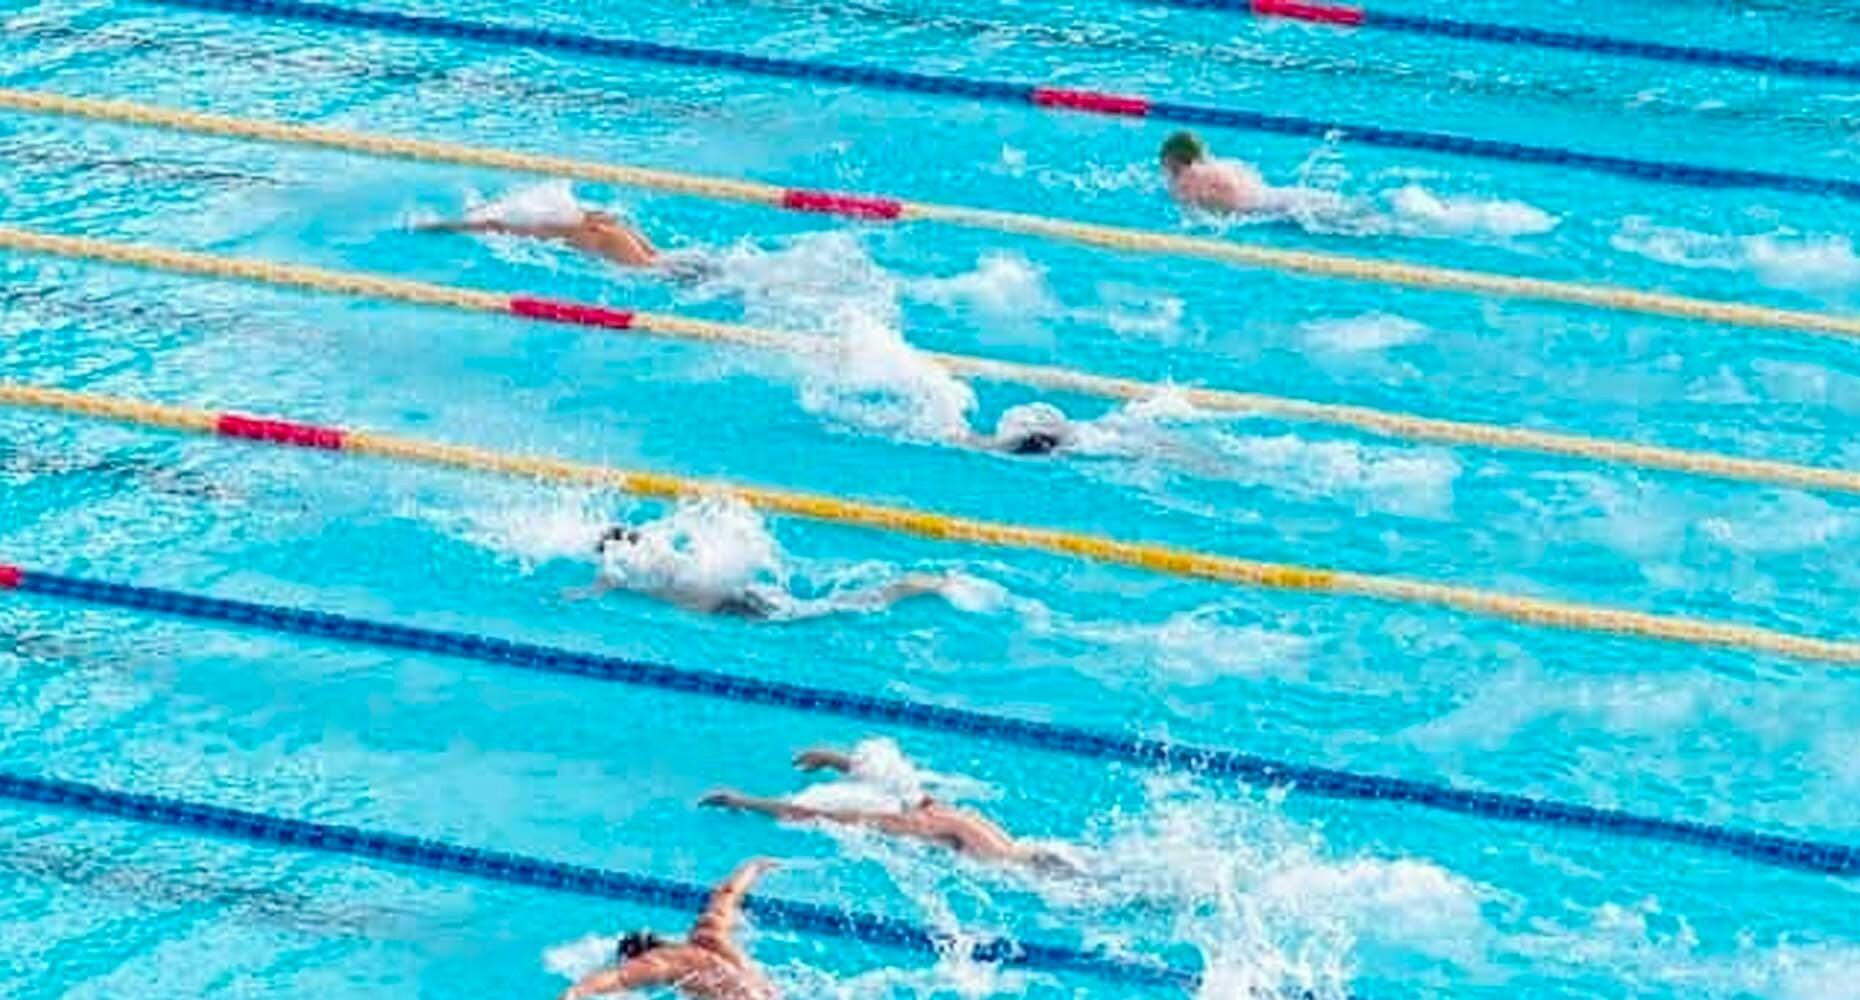 Swimmers in swimming lanes